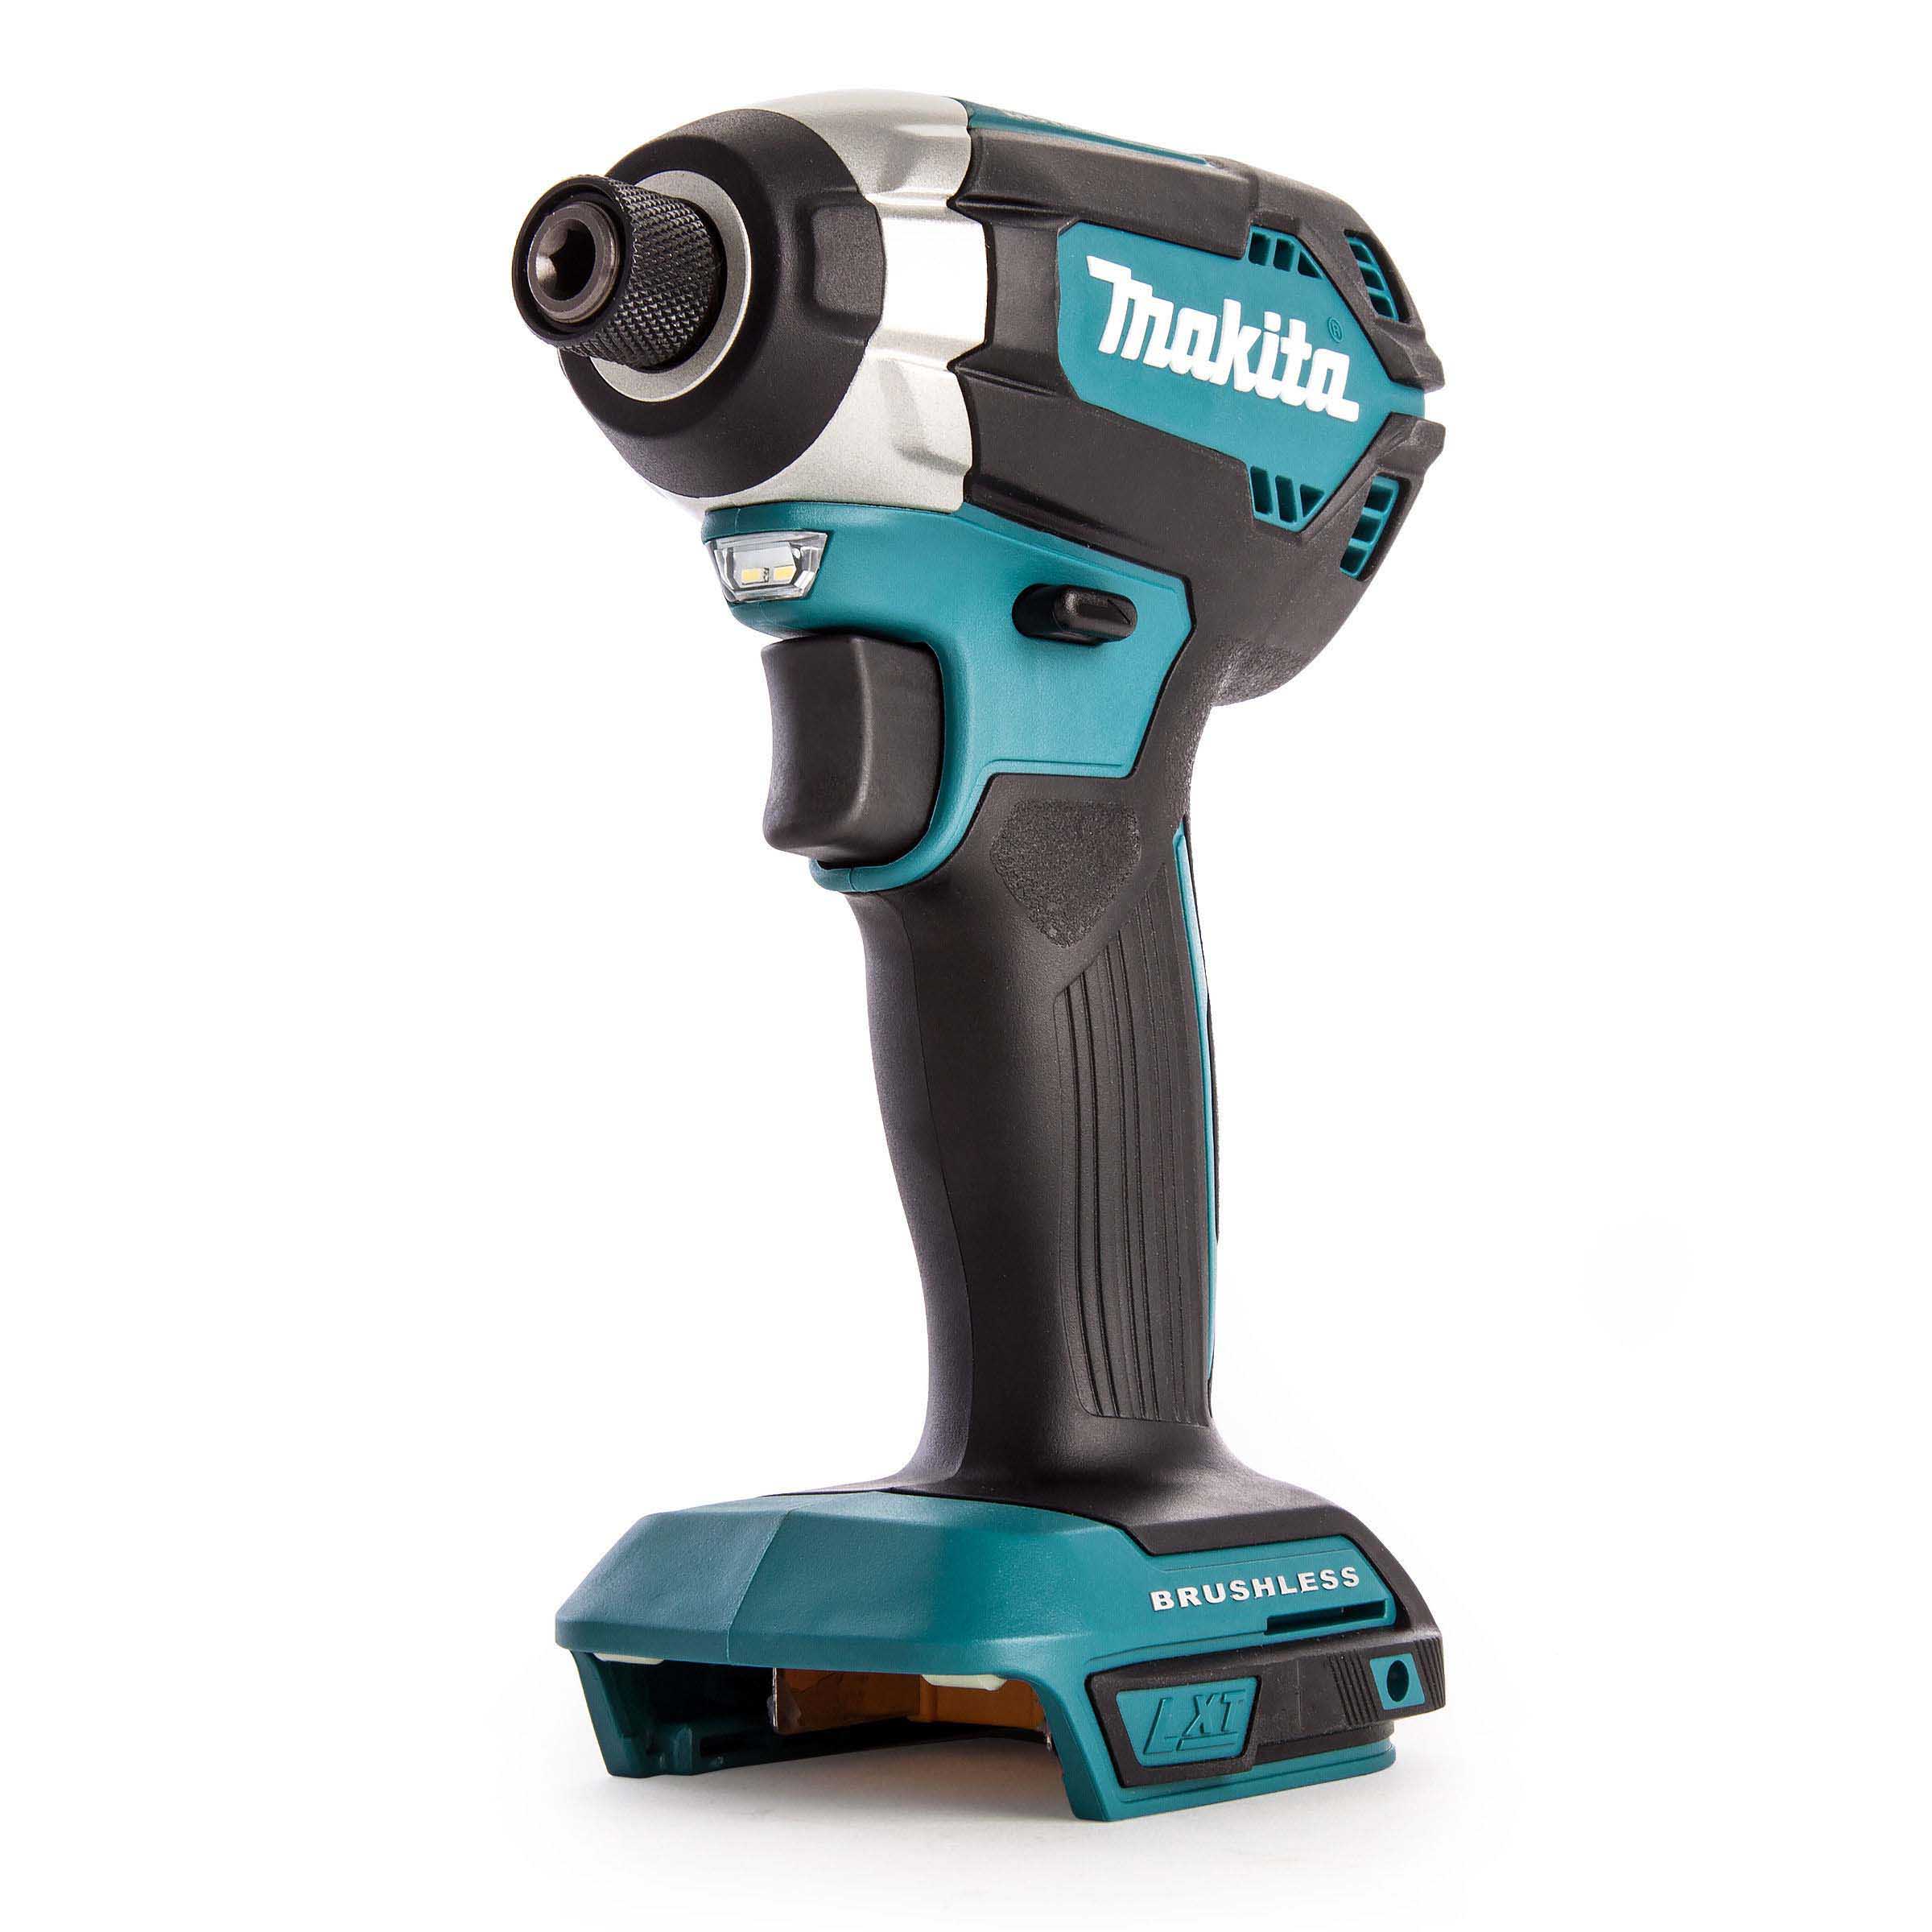 Drill driver connects Makita to DTD153Z battery